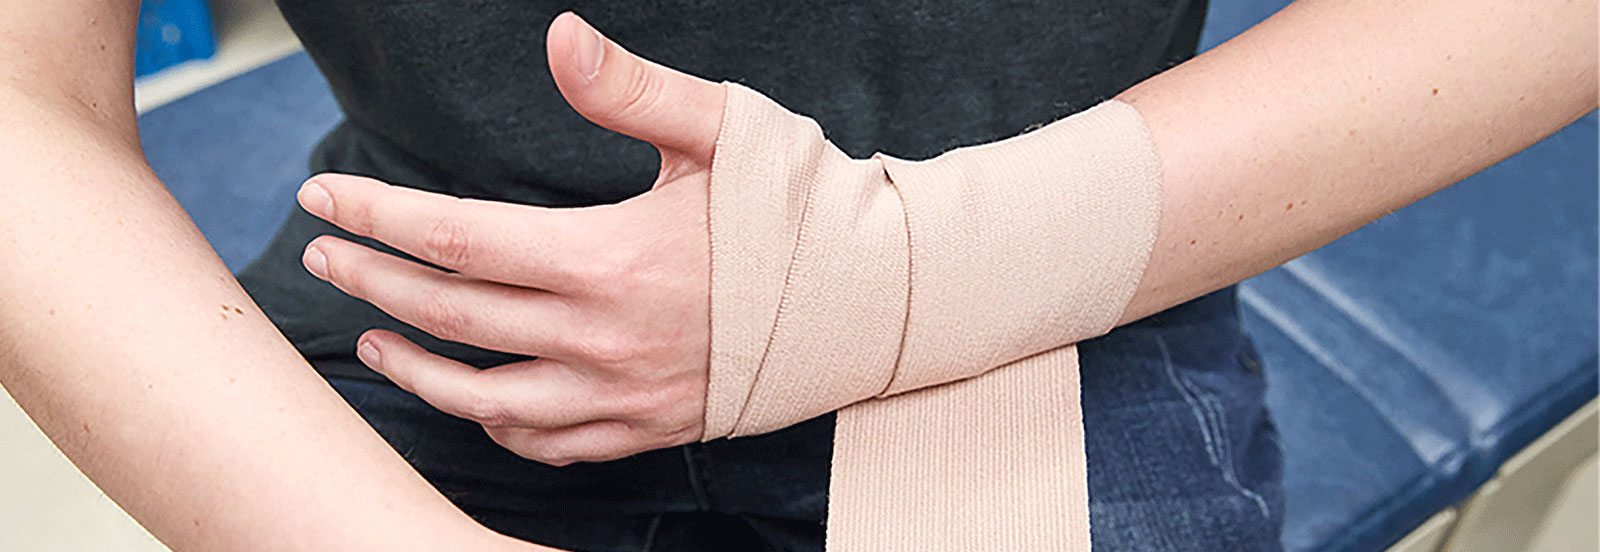 person wrapping bandage around sprained wrist